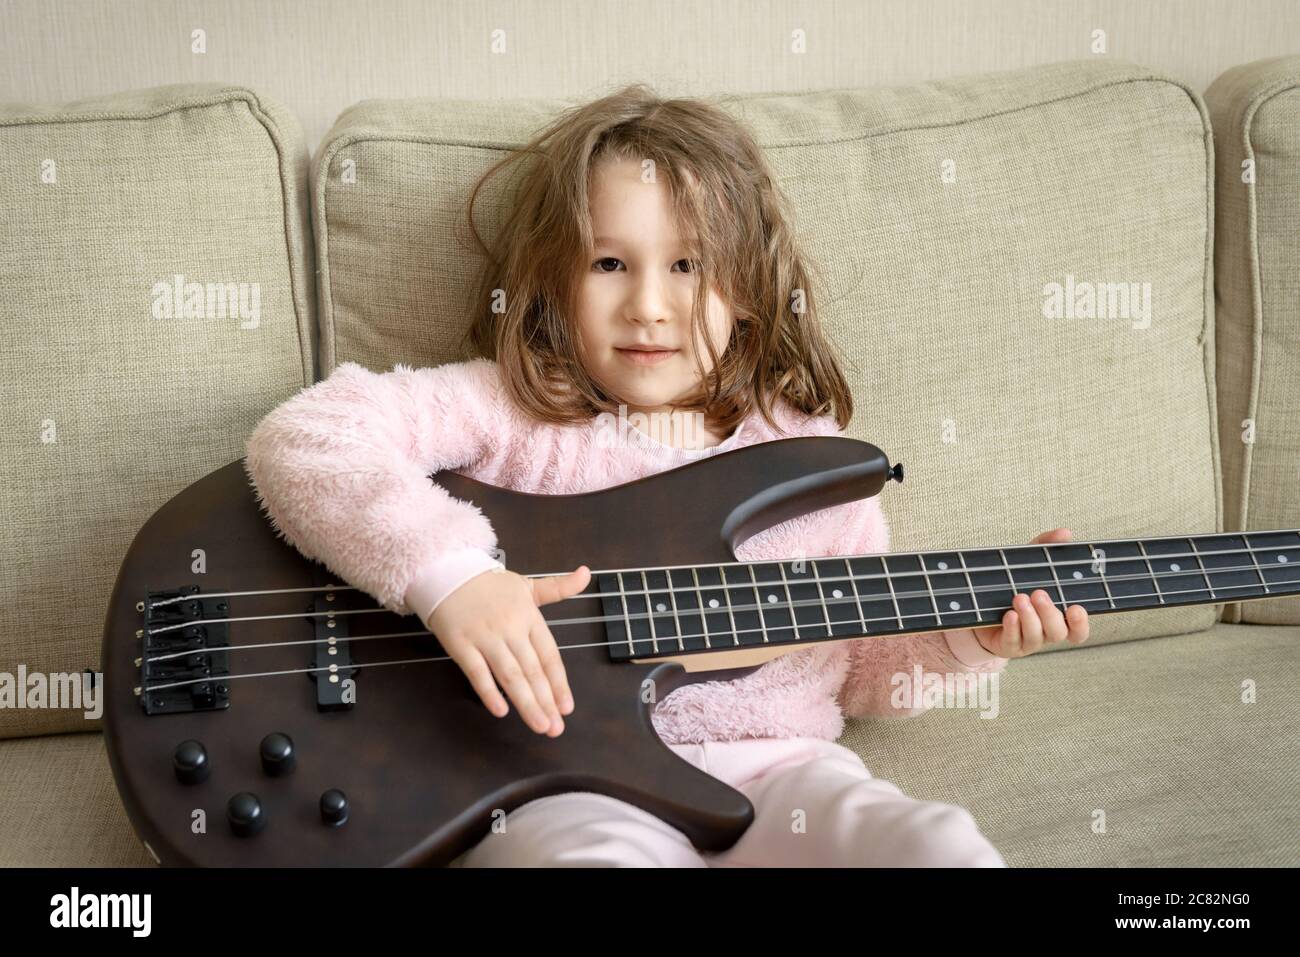 Child playing bass guitar at home, portrait of little baby girl sitting on couch with music instrument, happy cute kid hits the guitar strings, funny Stock Photo